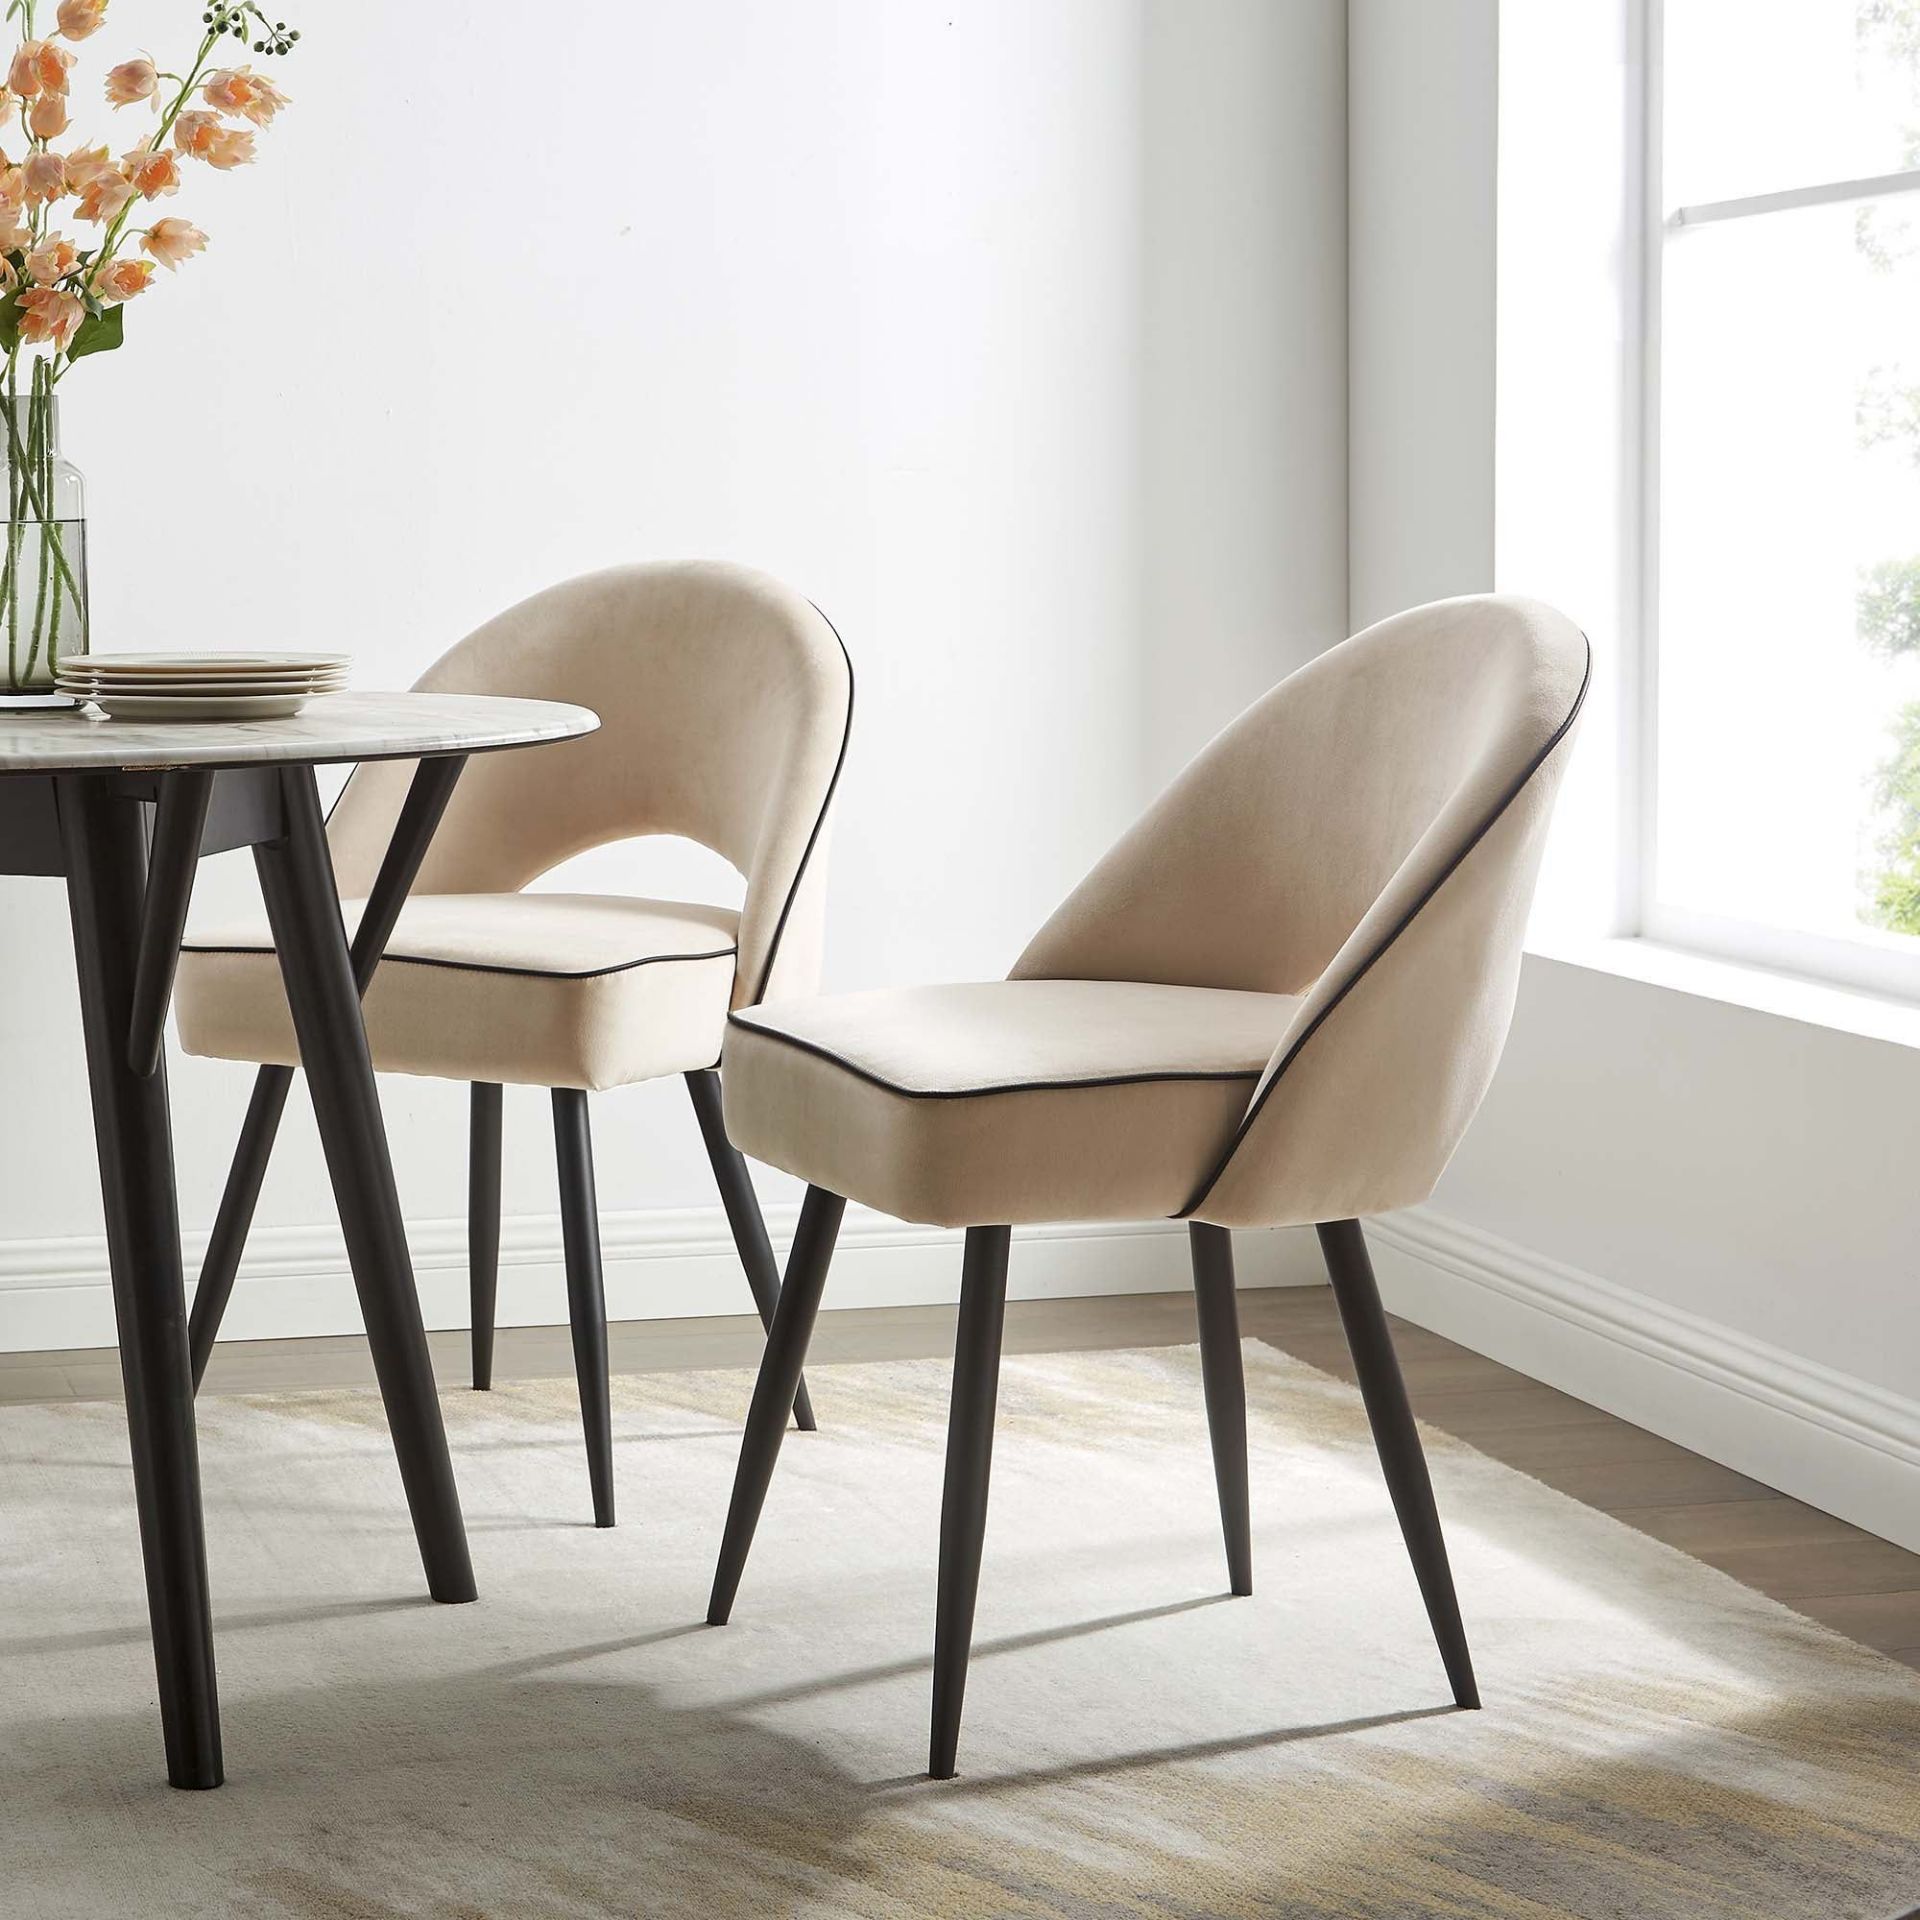 Oakley Set of 2 Champagne Velvet Upholstered Dining Chairs with Contrast Piping. - R14BW. RRP £249. - Image 2 of 2